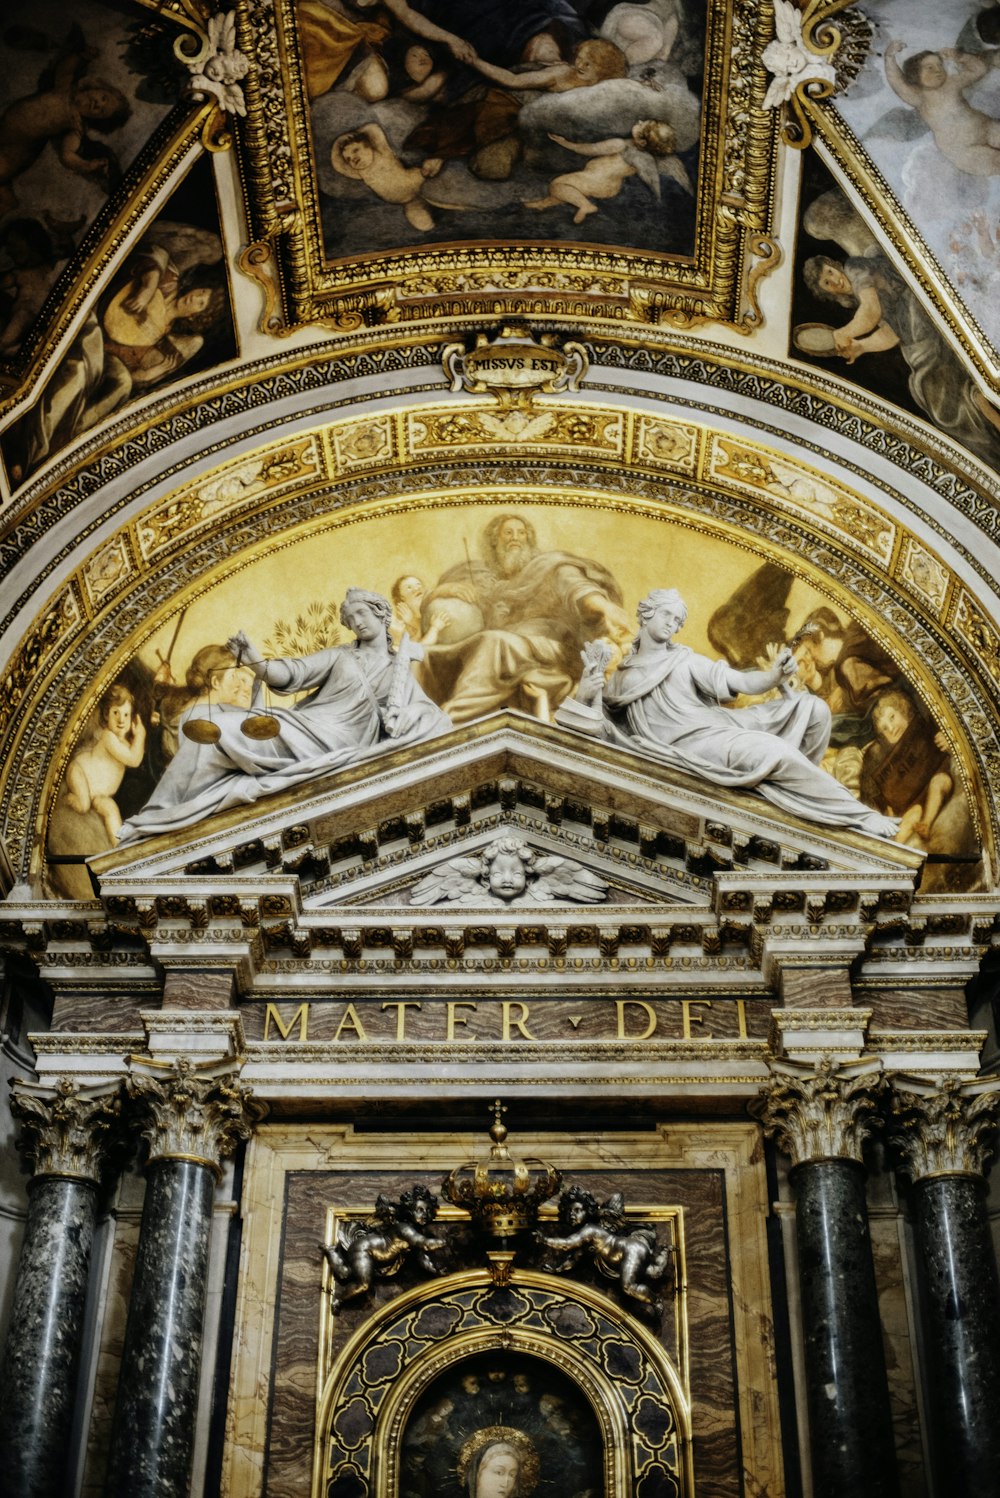 a gold and ornate ceiling with statues